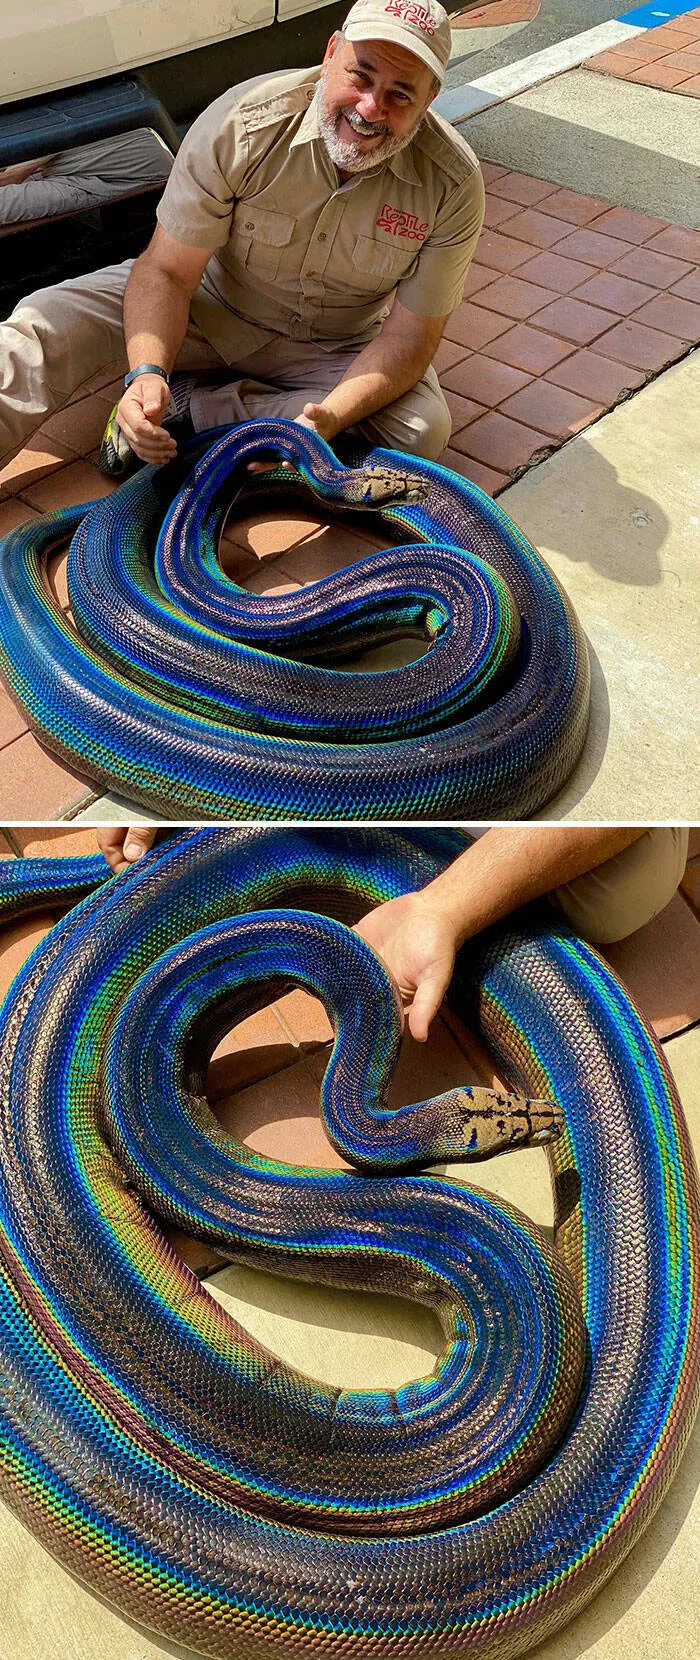 Unusual perspectives unveiled rare images that surprise and delight - #4 A colorful and rare python